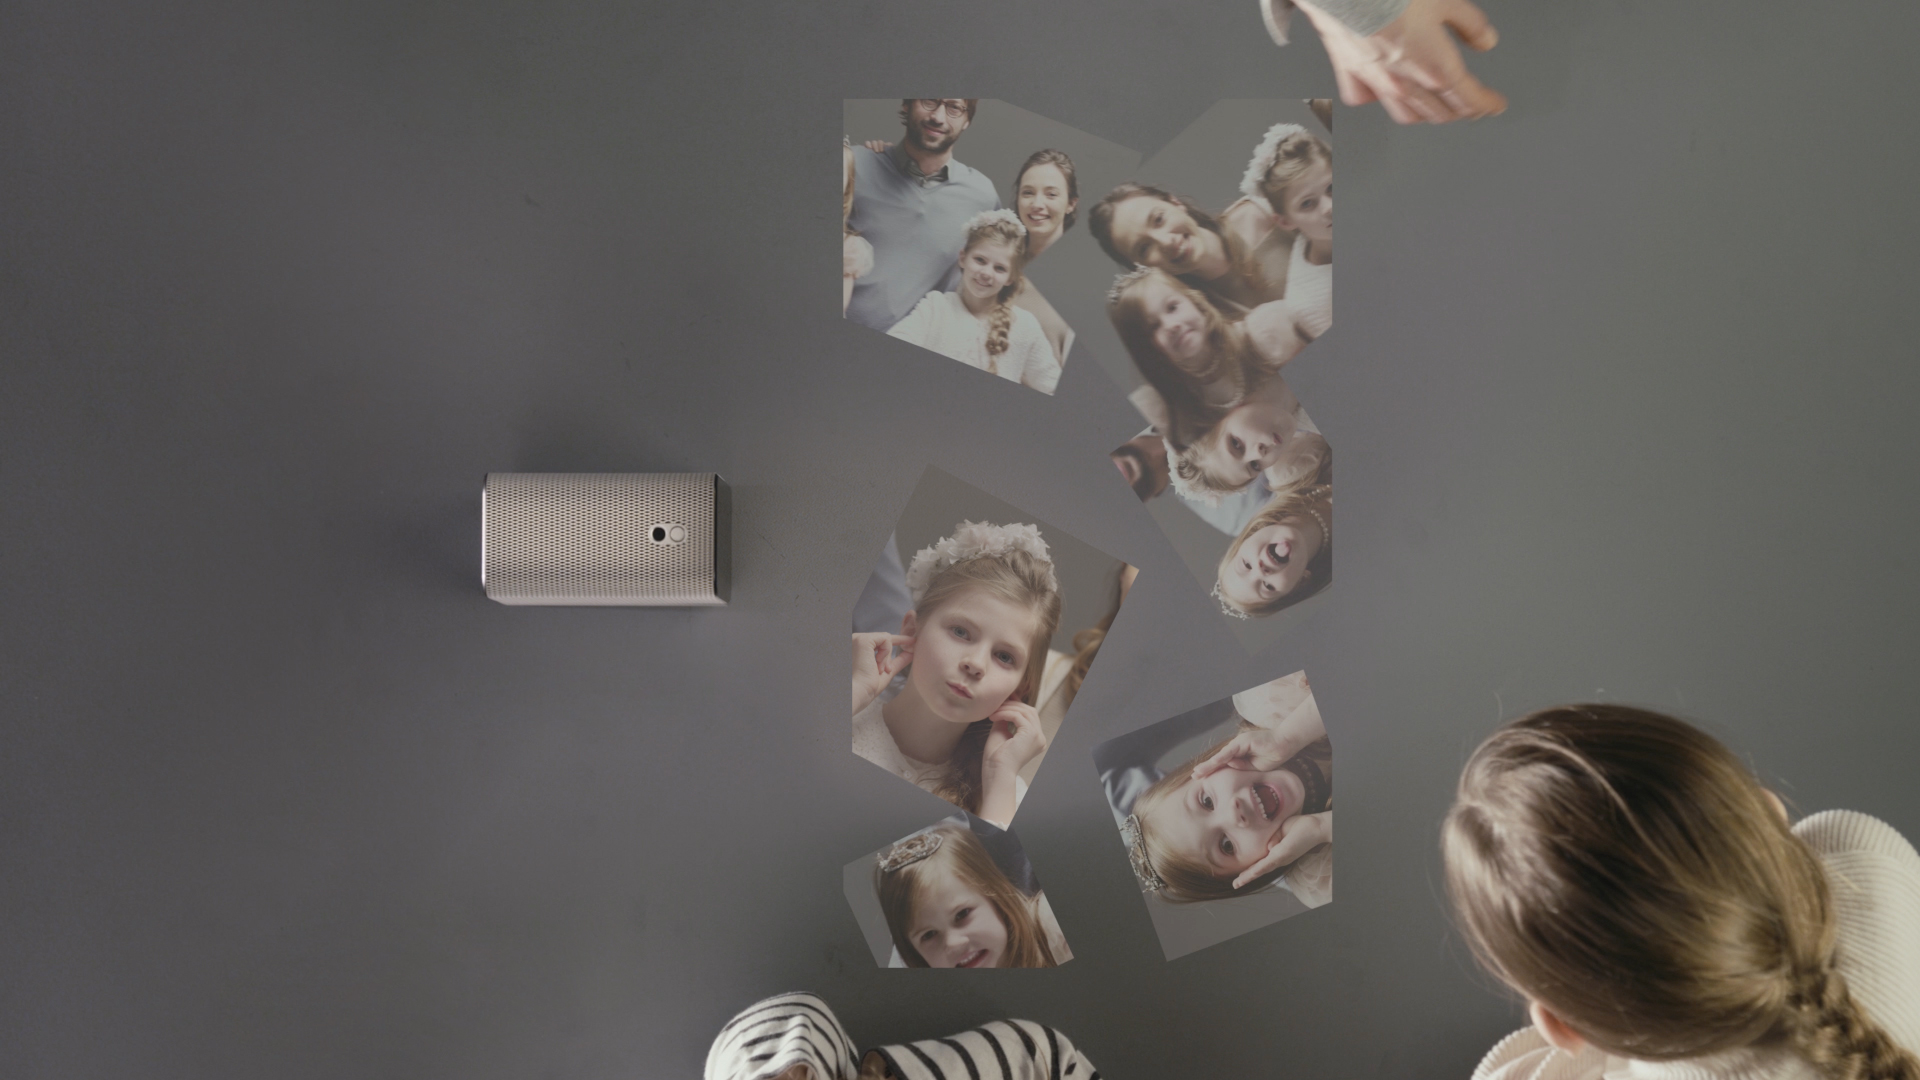 Xperia-Projector-Lifestyle